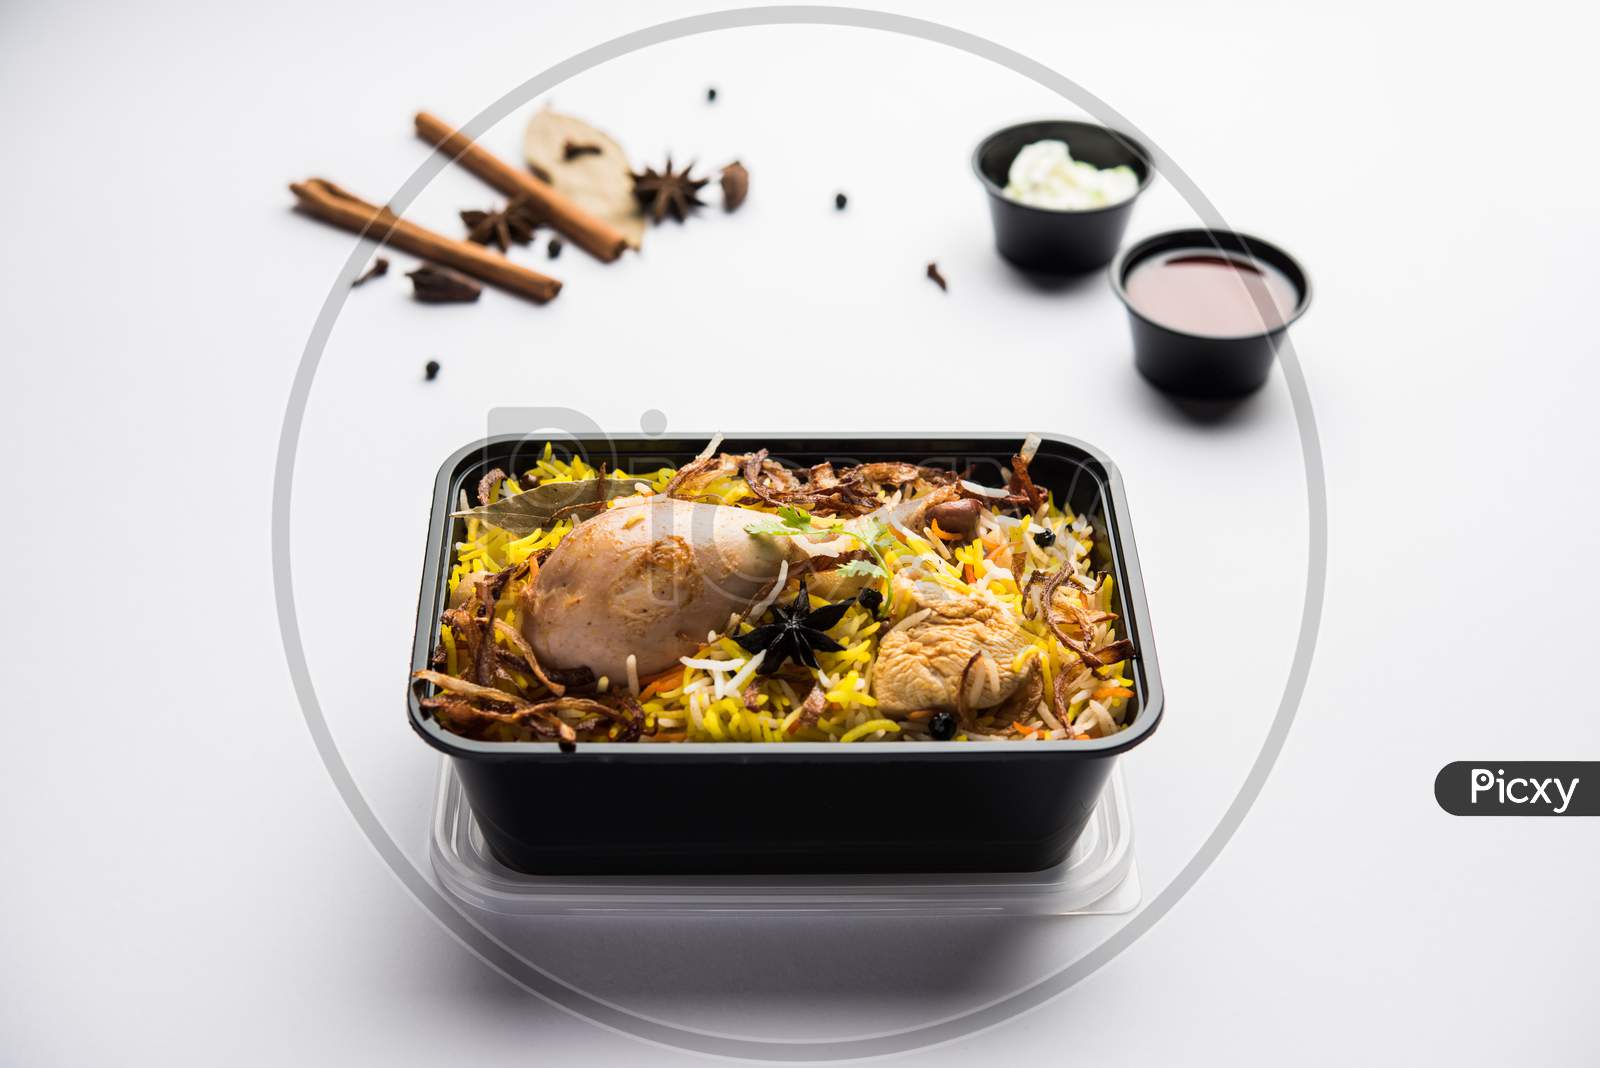 Chicken Biryani Is A Popular Non-Veg Food From India, Packed In Plastic Container